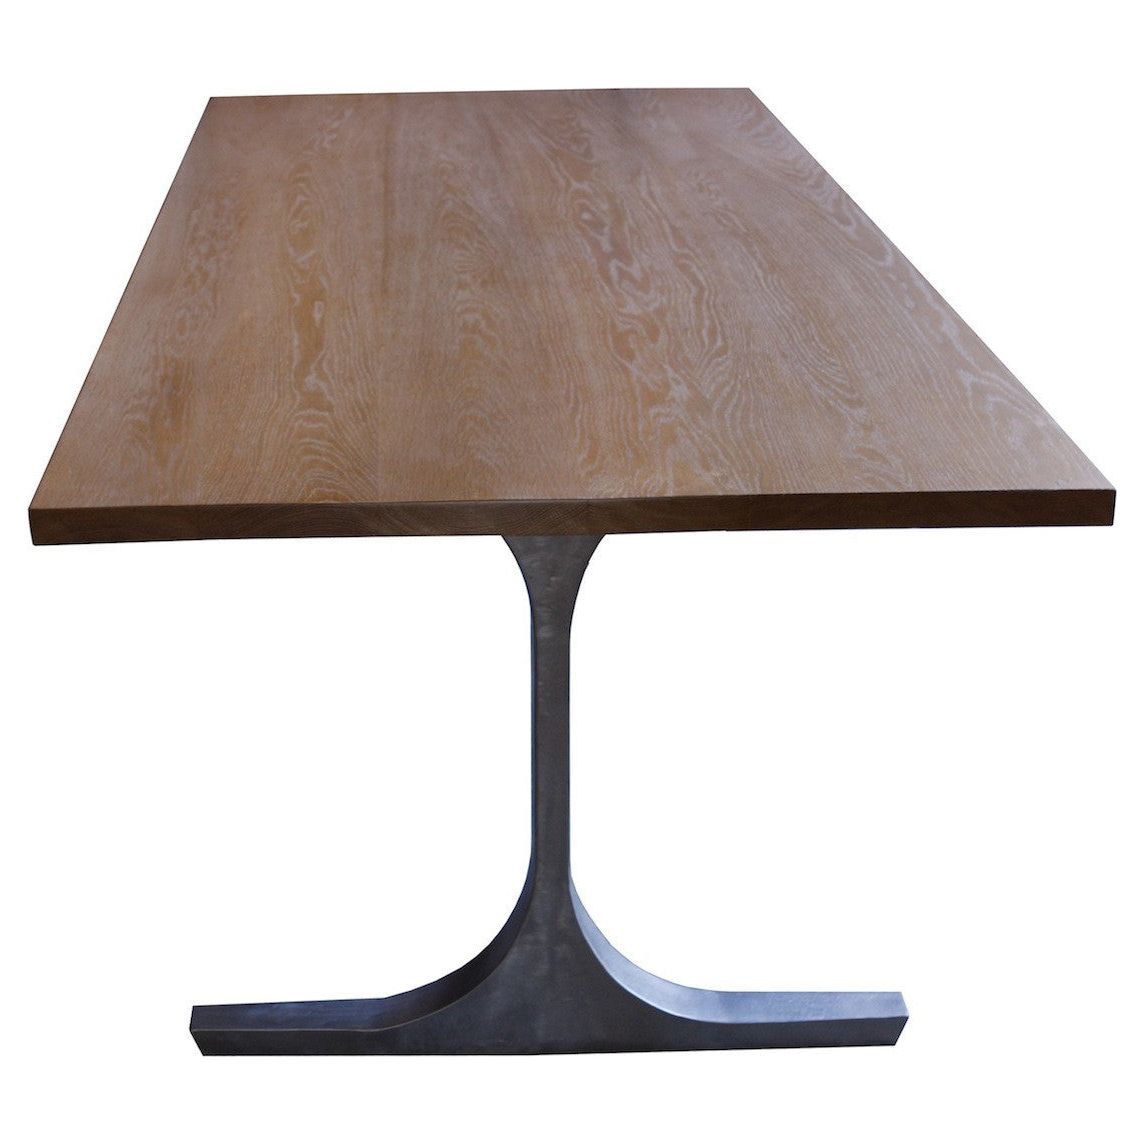 Photographed in the Shade -solid white oak top